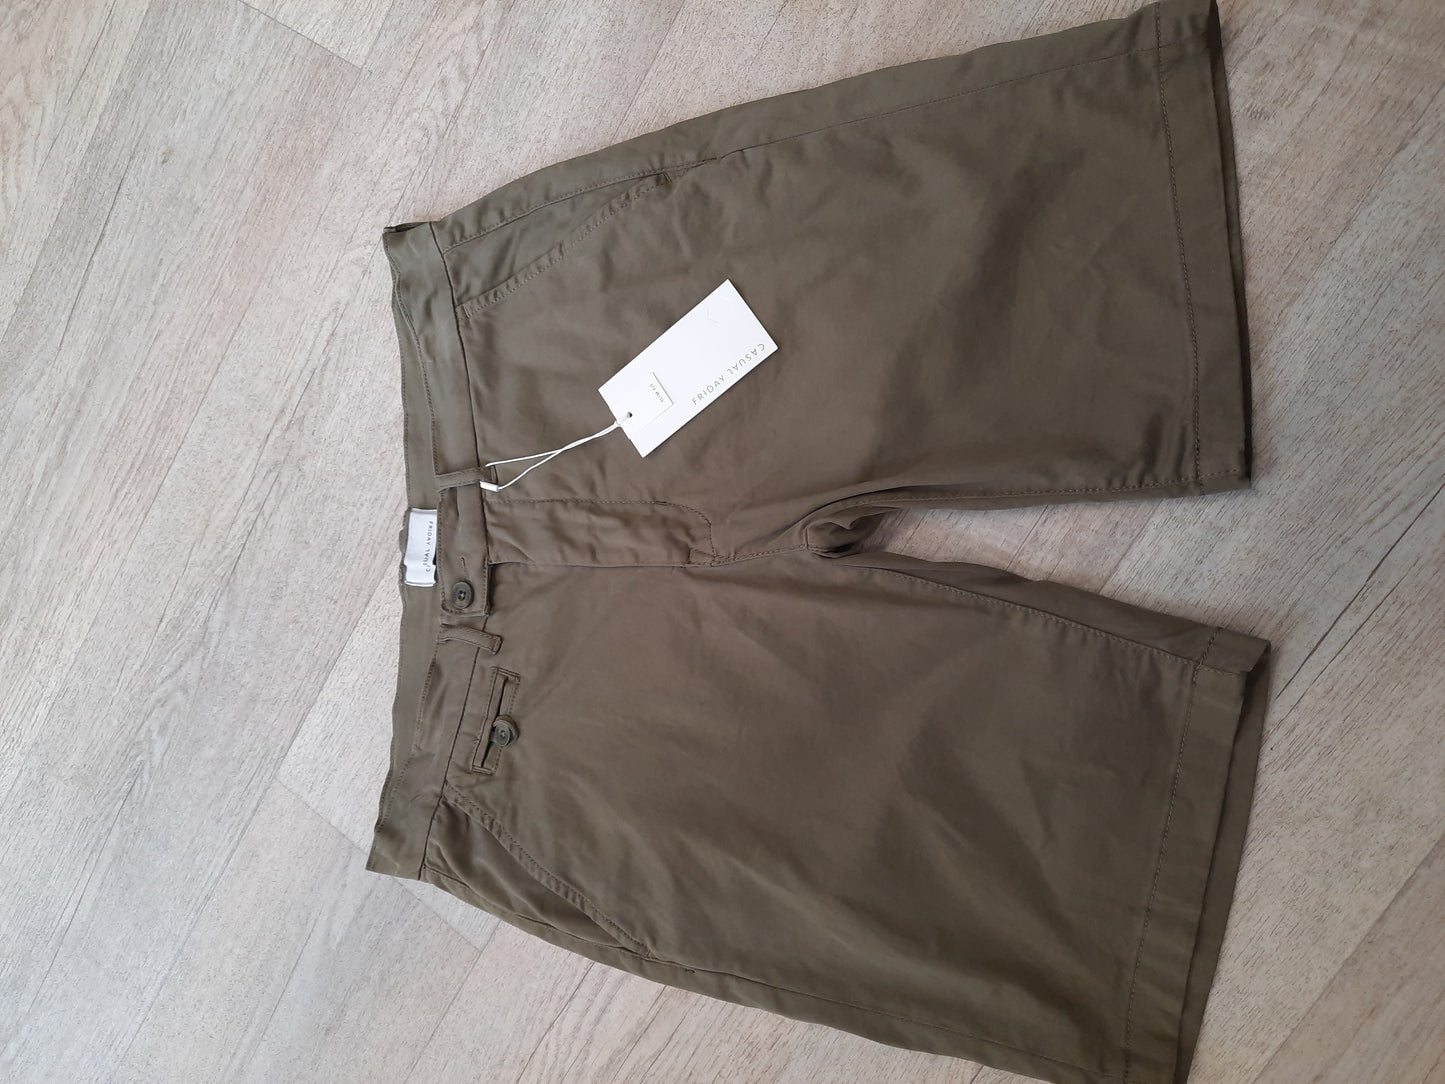 Chino Shorts in Khaki by Casual Friday